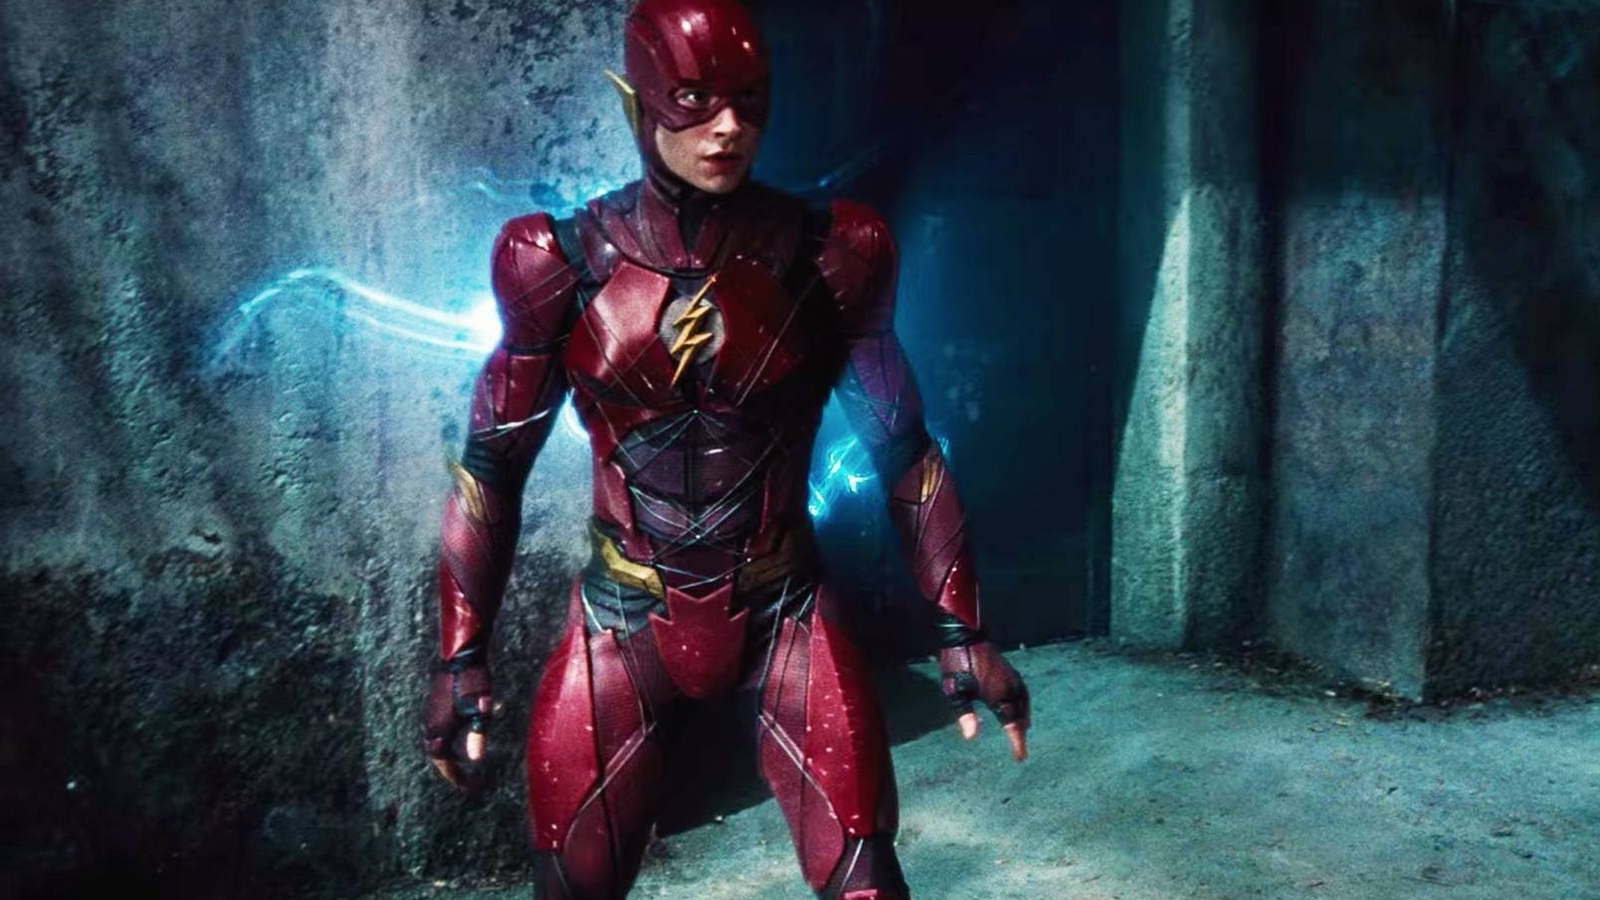 Flash star Ezra Miller’s DC future has reportedly been put ‘on pause’ by Warner Bros after his arrest